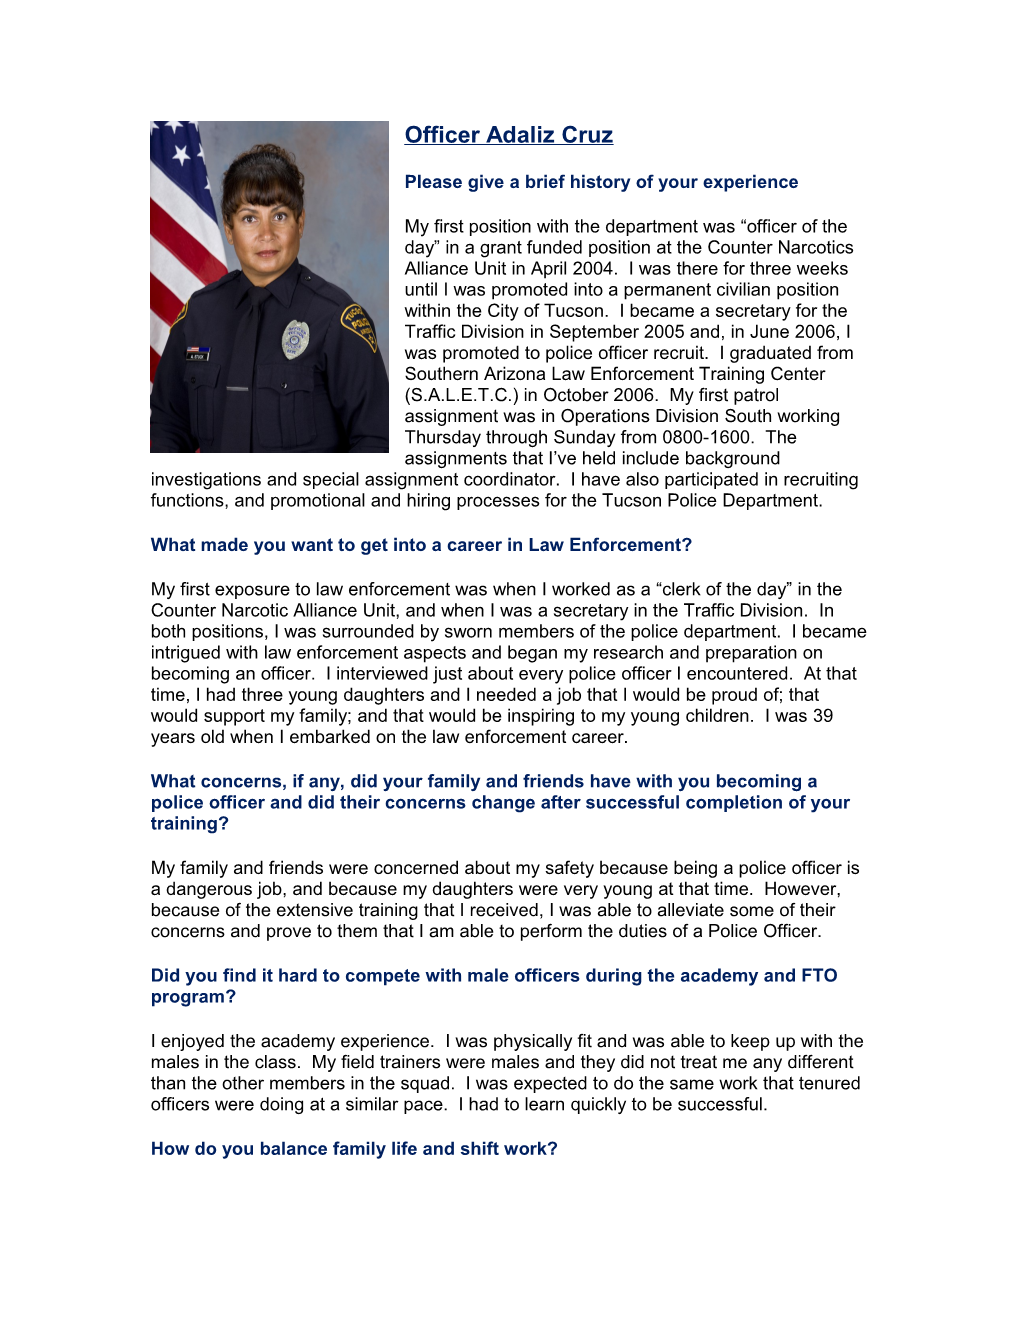 Women in Policing Questionnaire